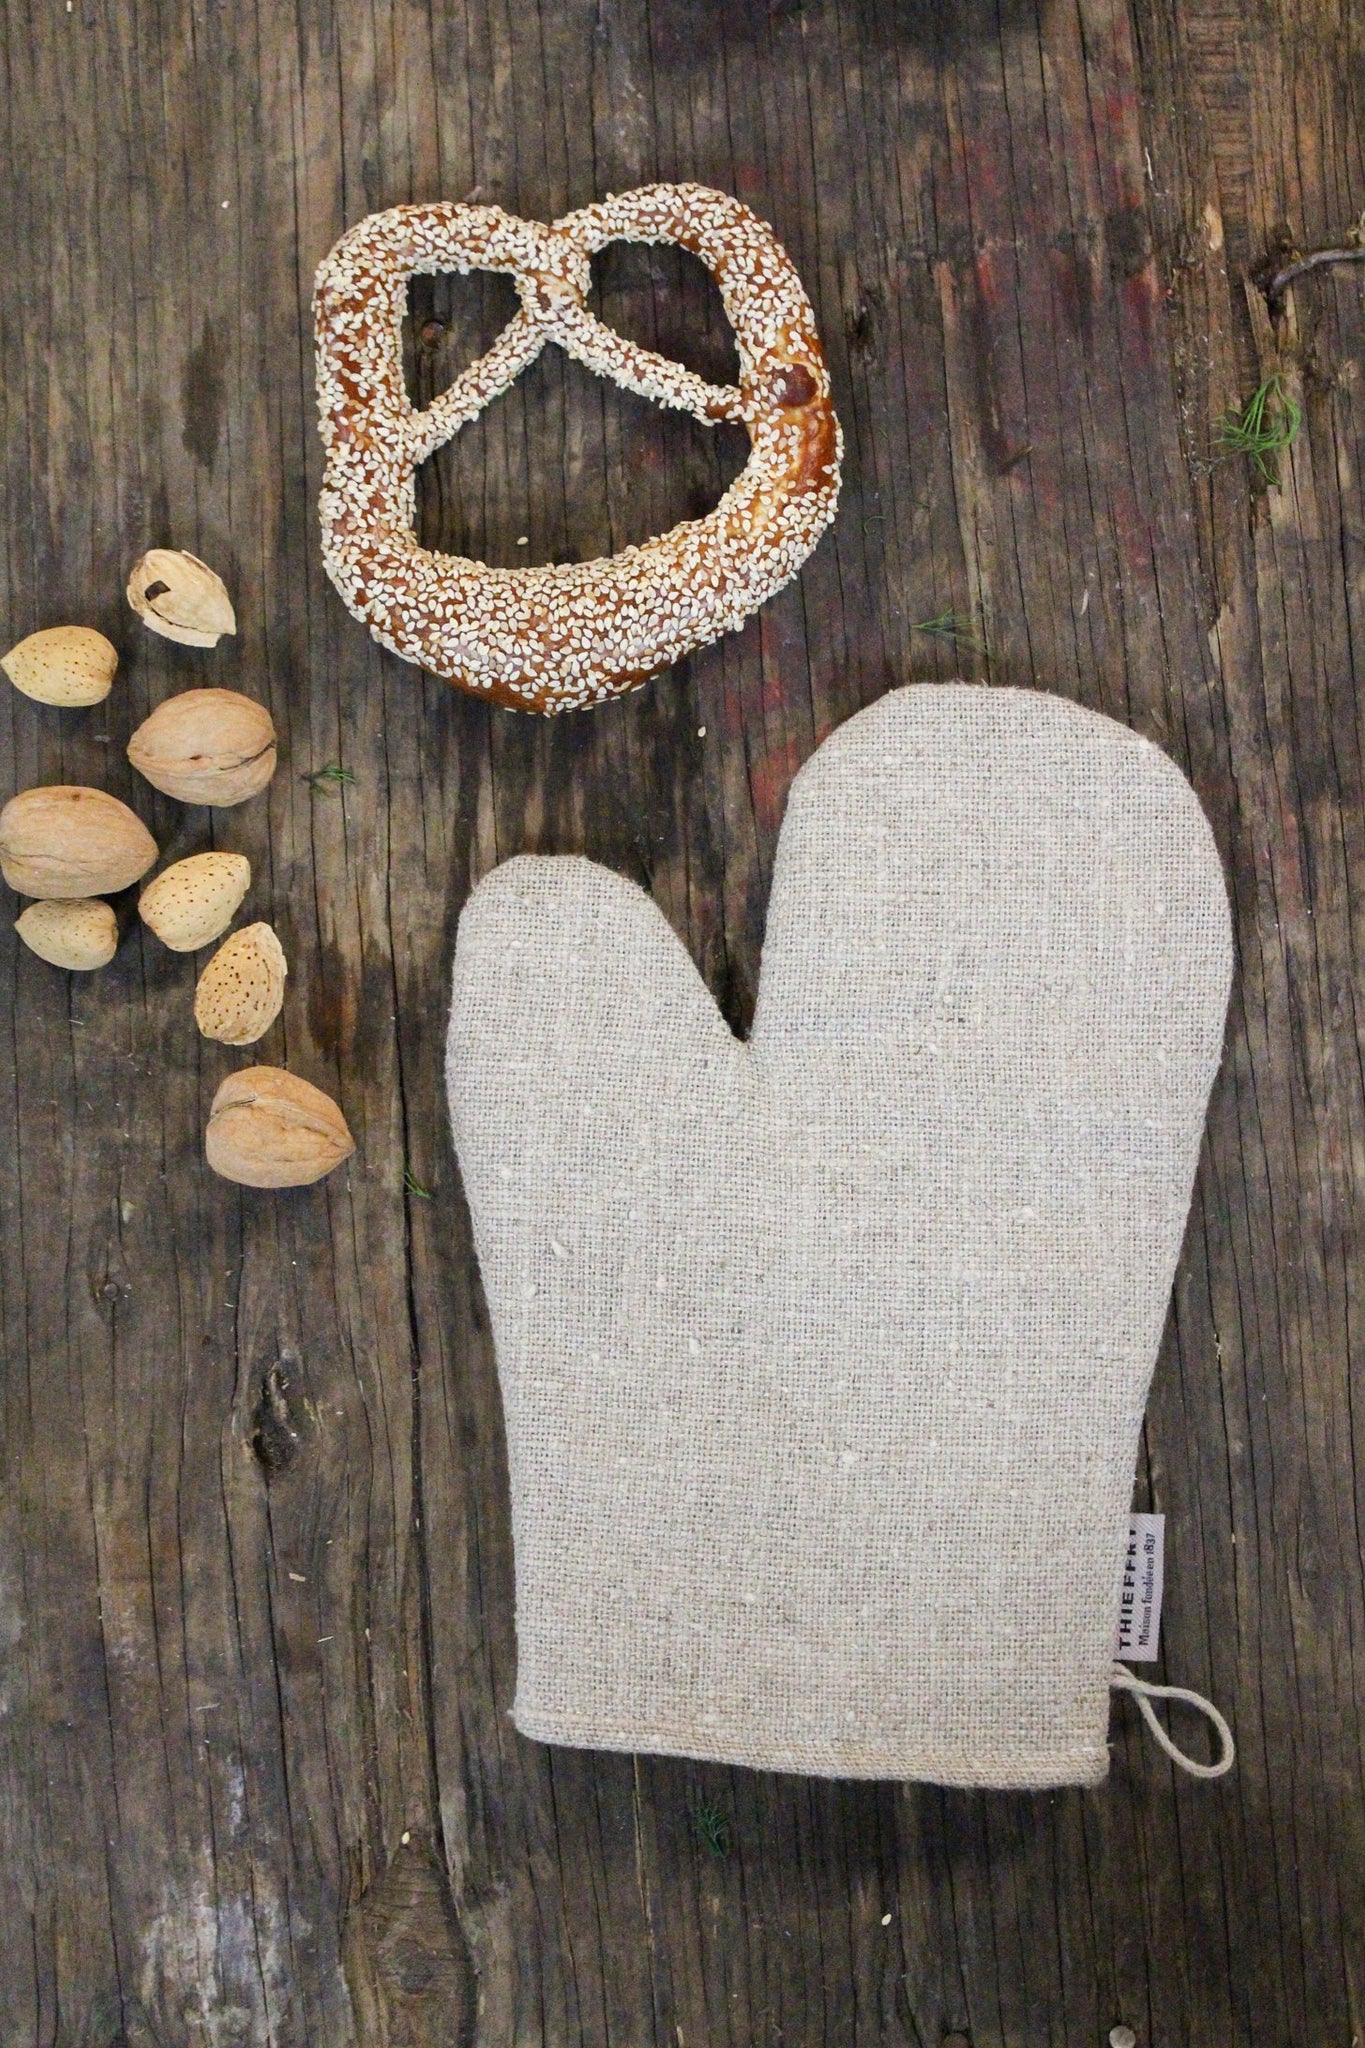 Linen oven mitt next to pretzel and walnuts on wooden table.